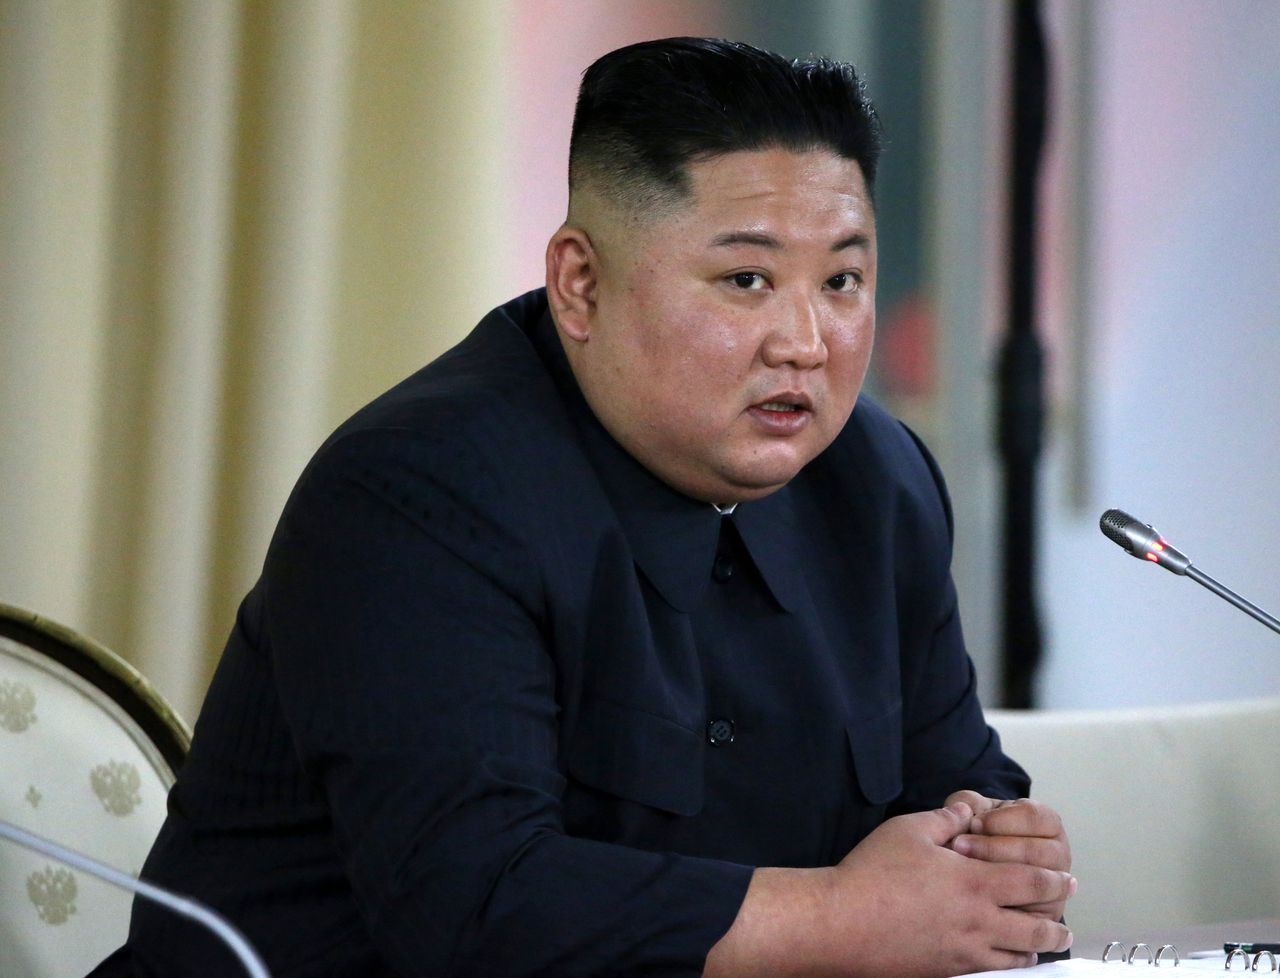 Public executions for Covid-19 breaches in North Korea, warns Rights Group